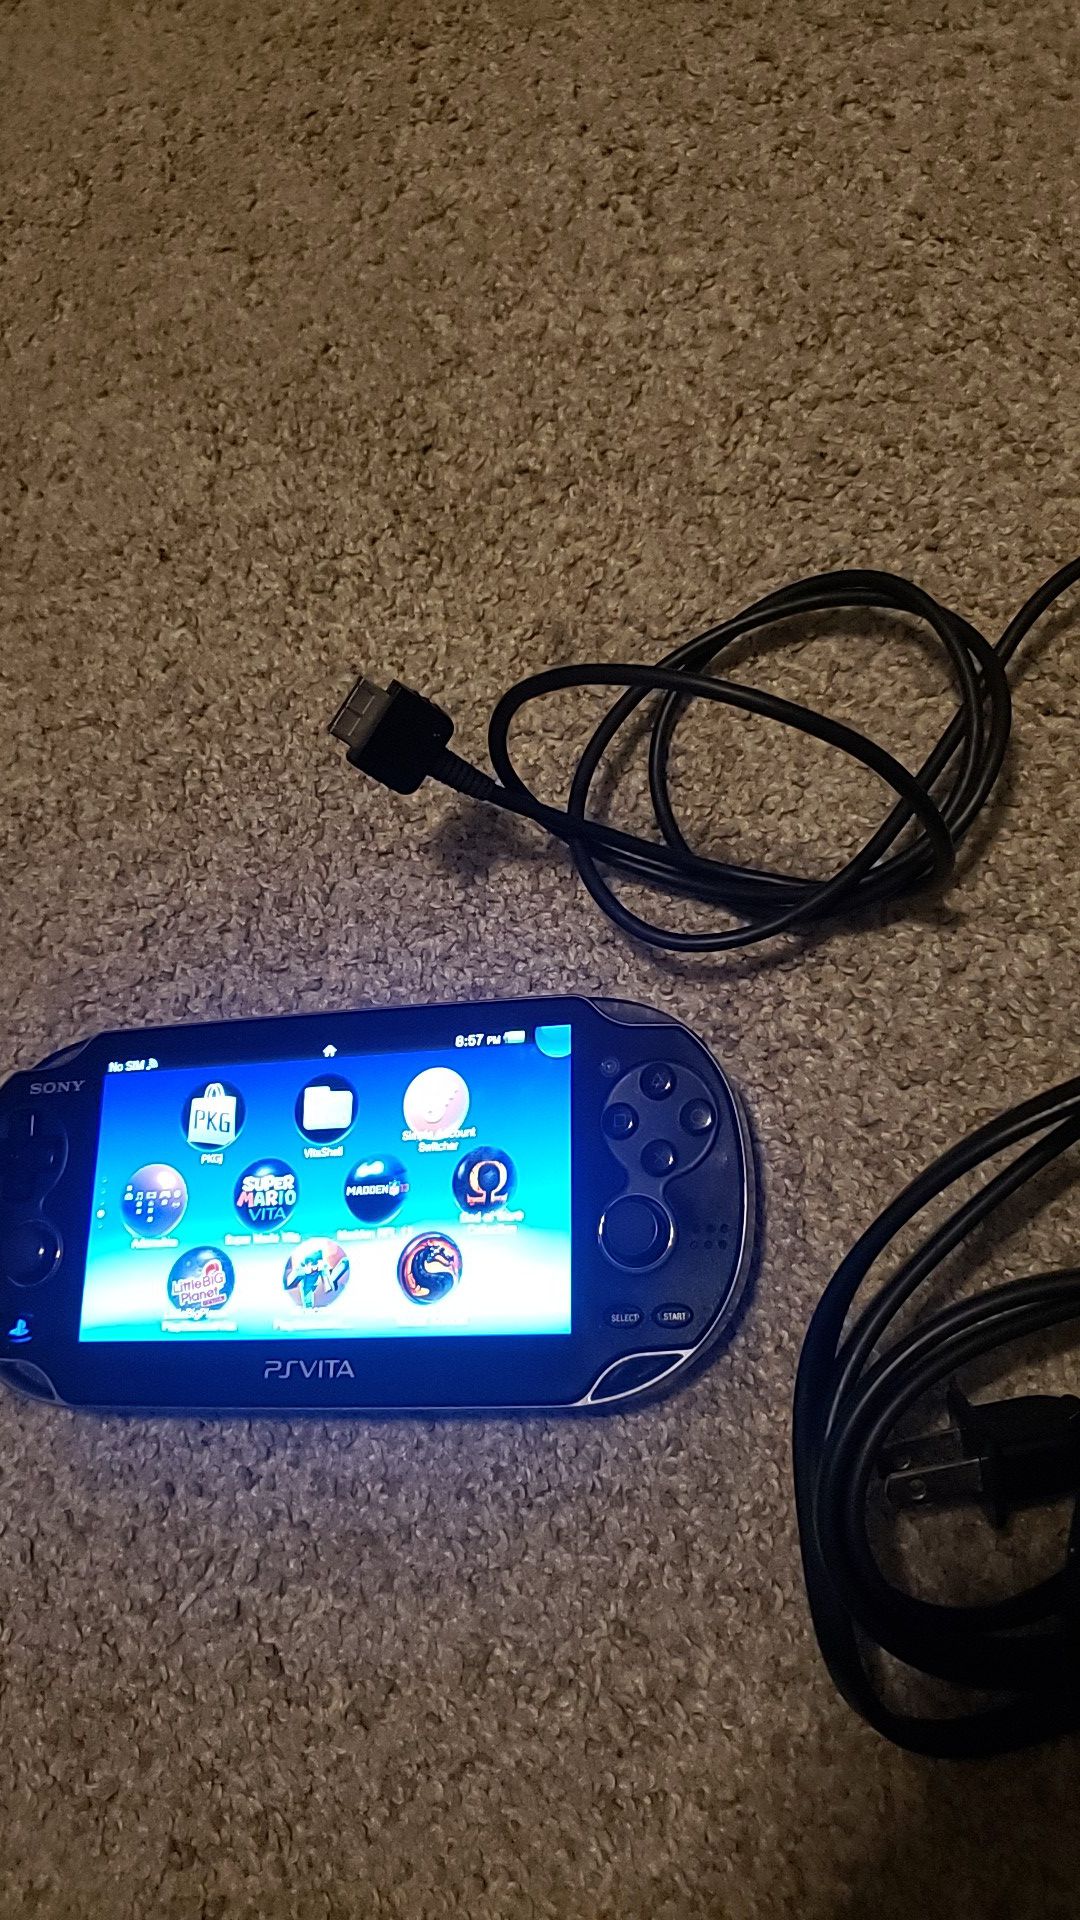 Ps vita with Games